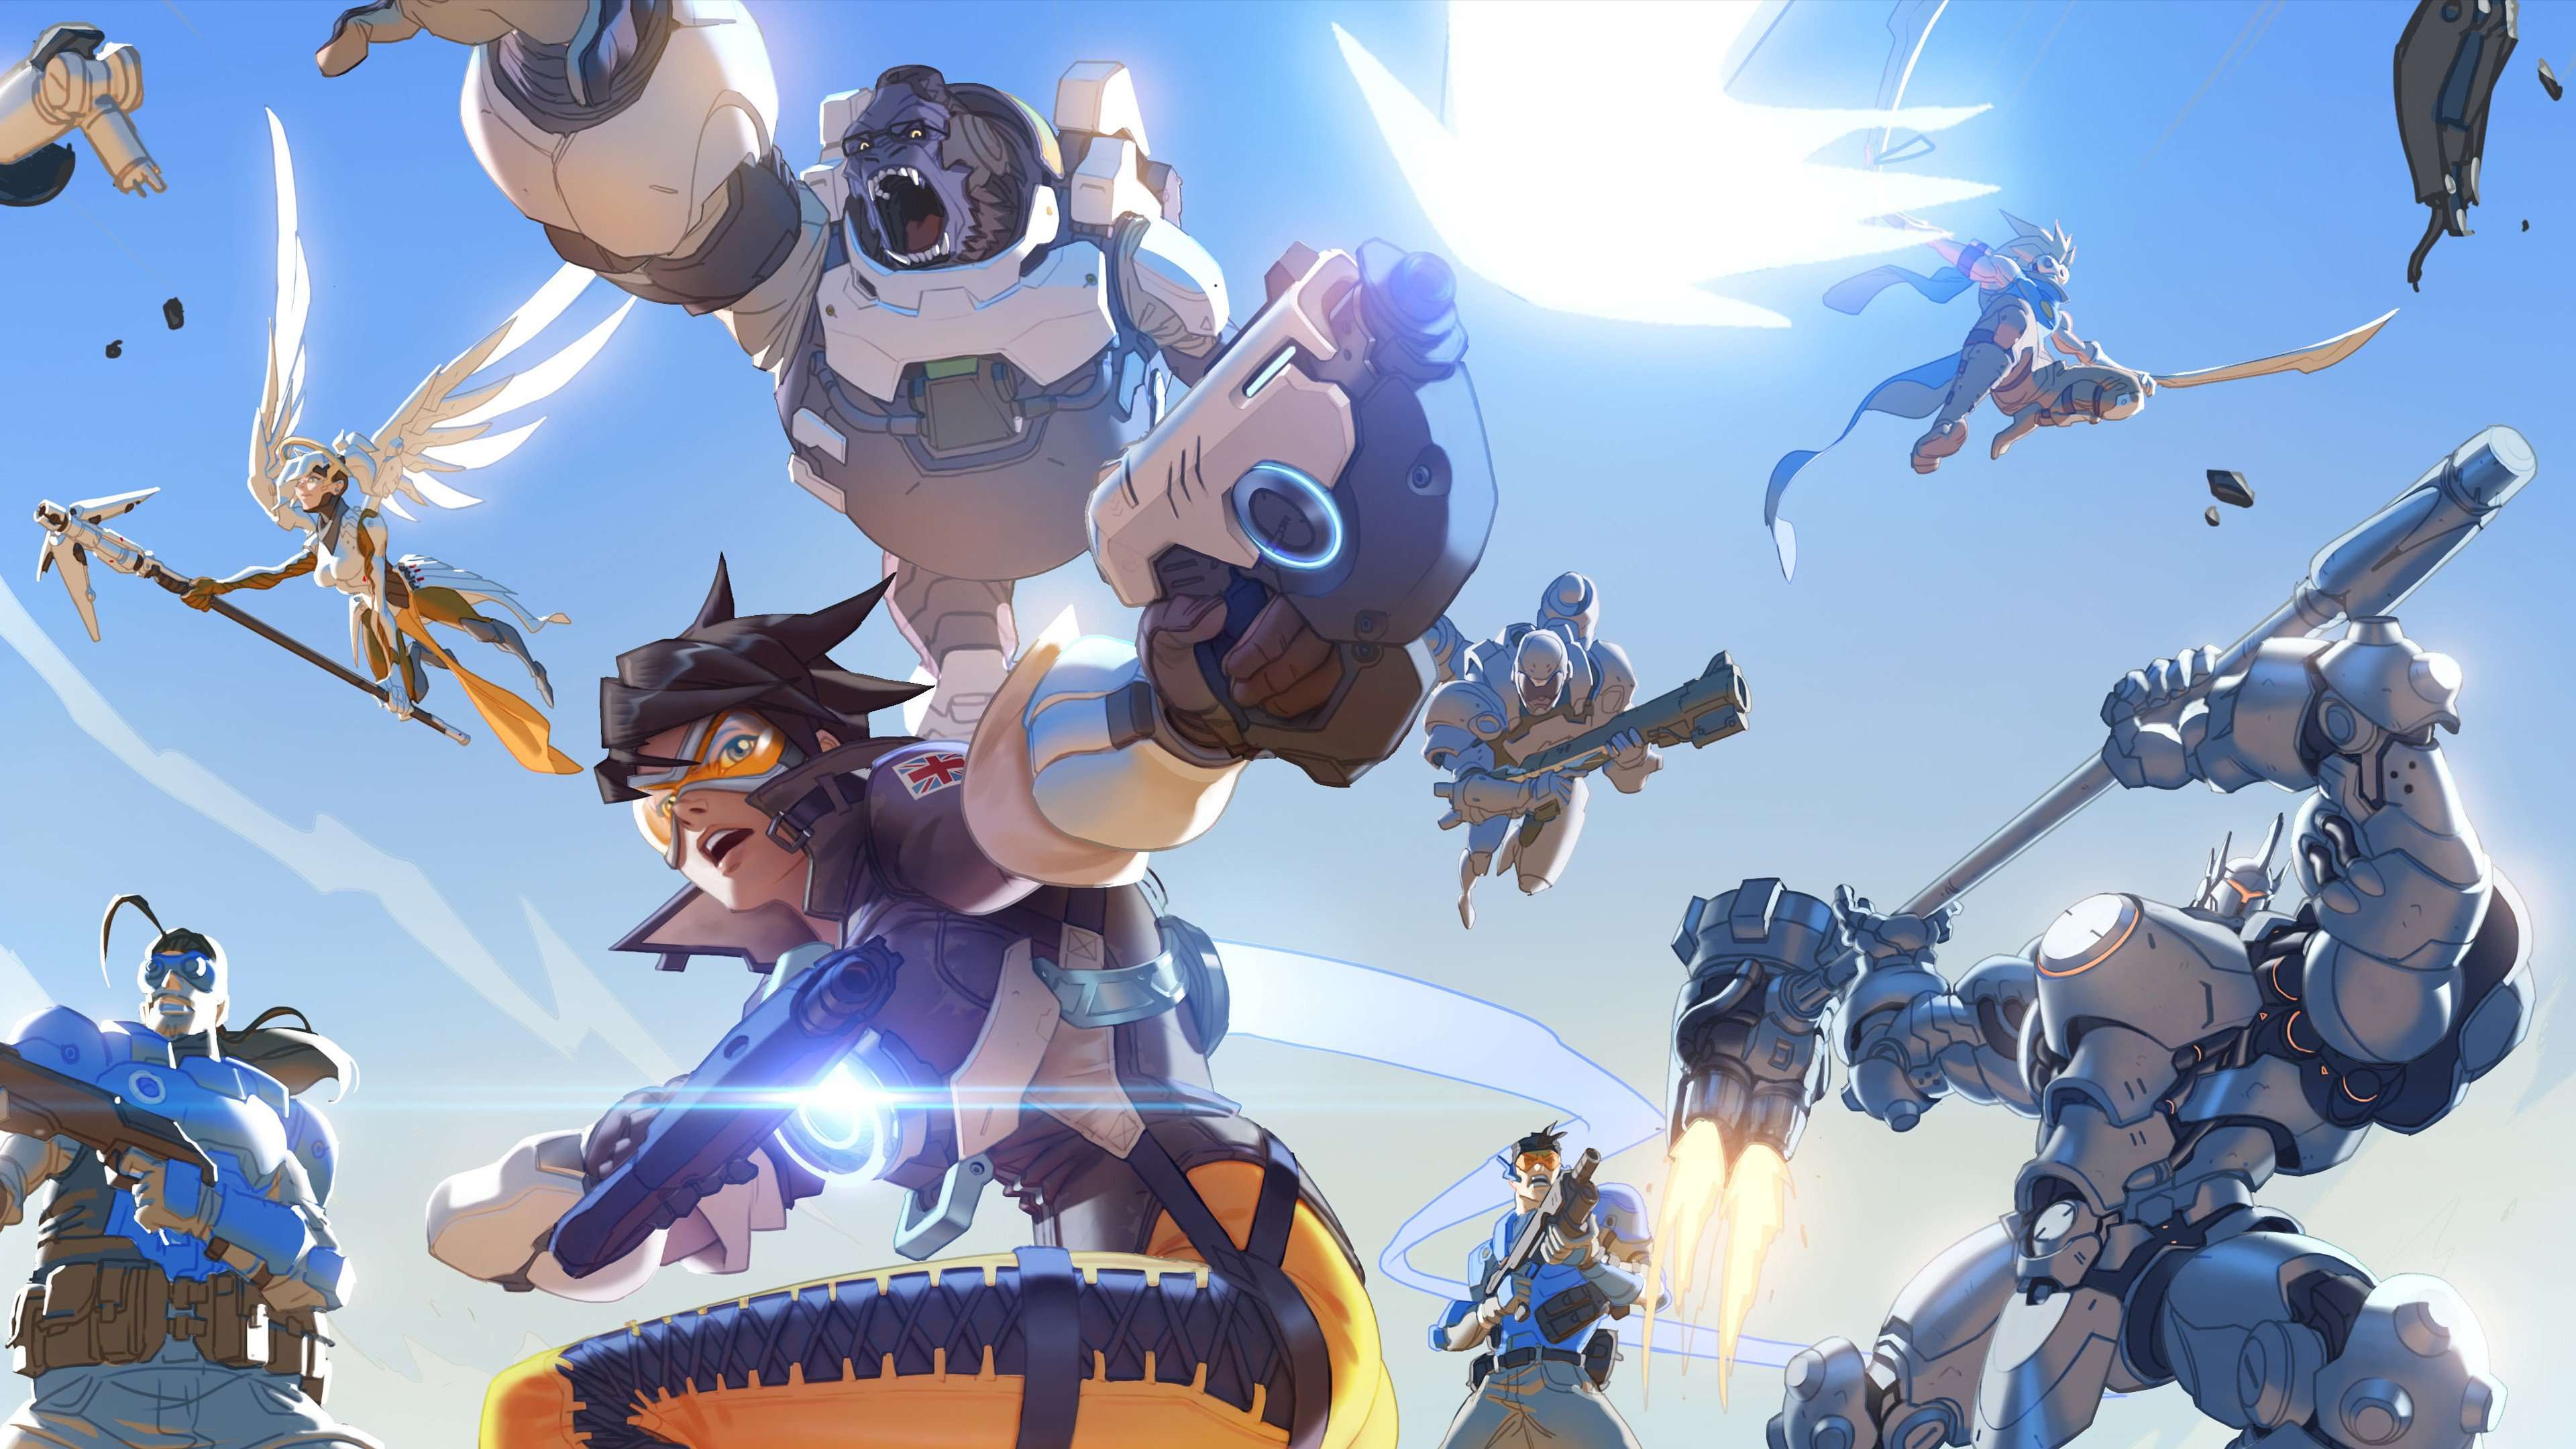 Overwatch remains relevant seven months after its release.